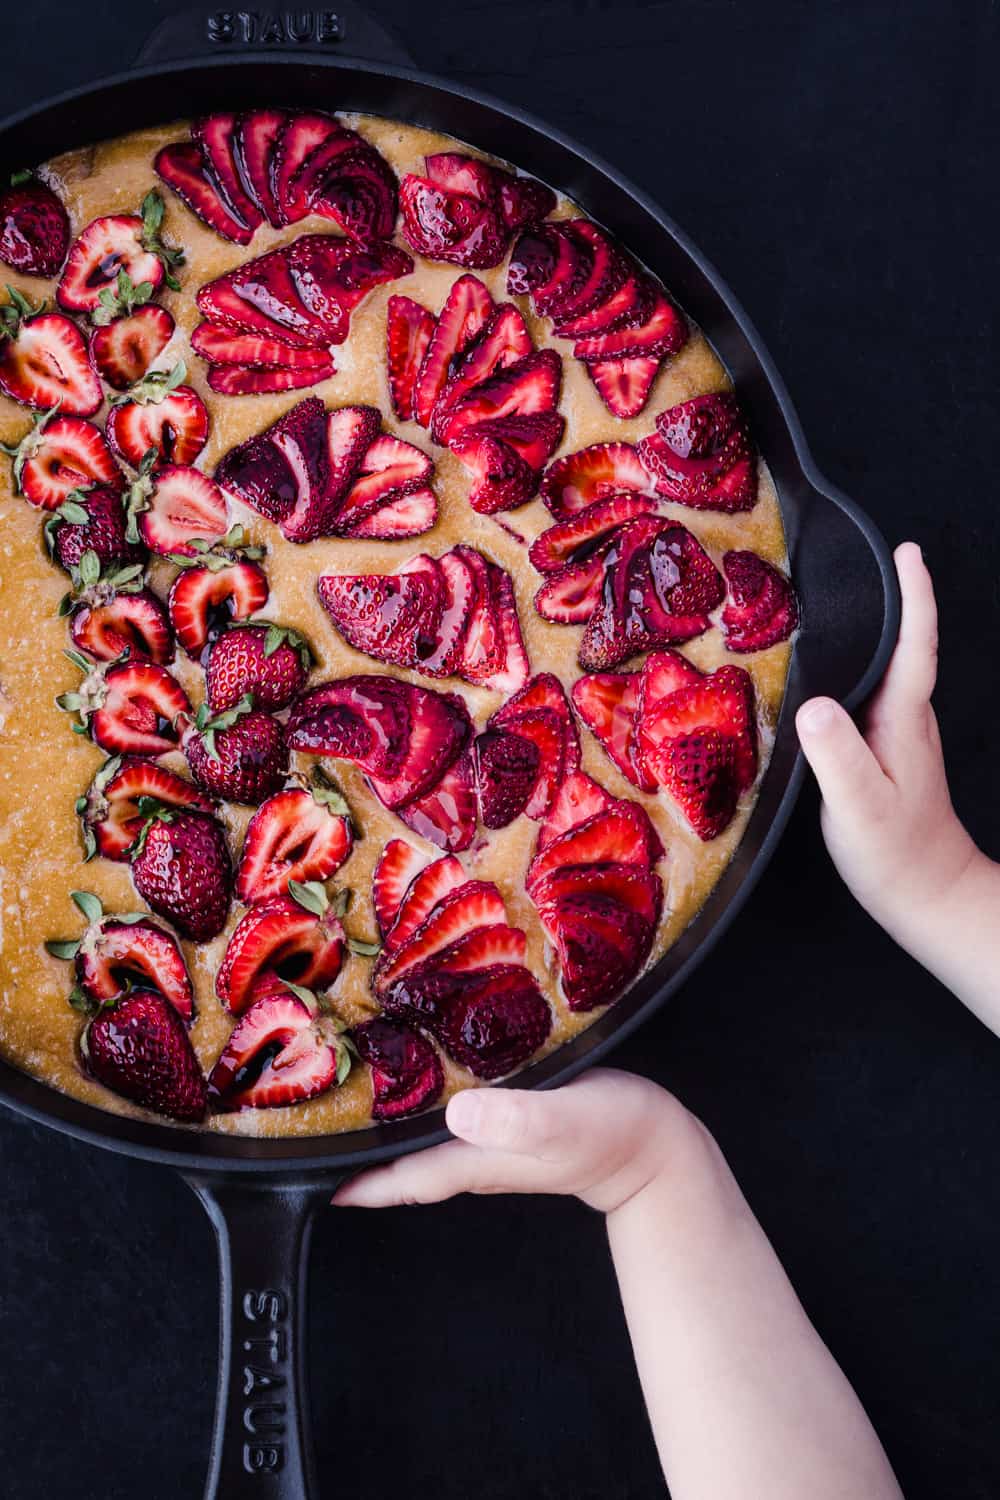 olive oil cake with strawberries in a cast iron skillet. pre-oven, with little kid hands on the skillet.